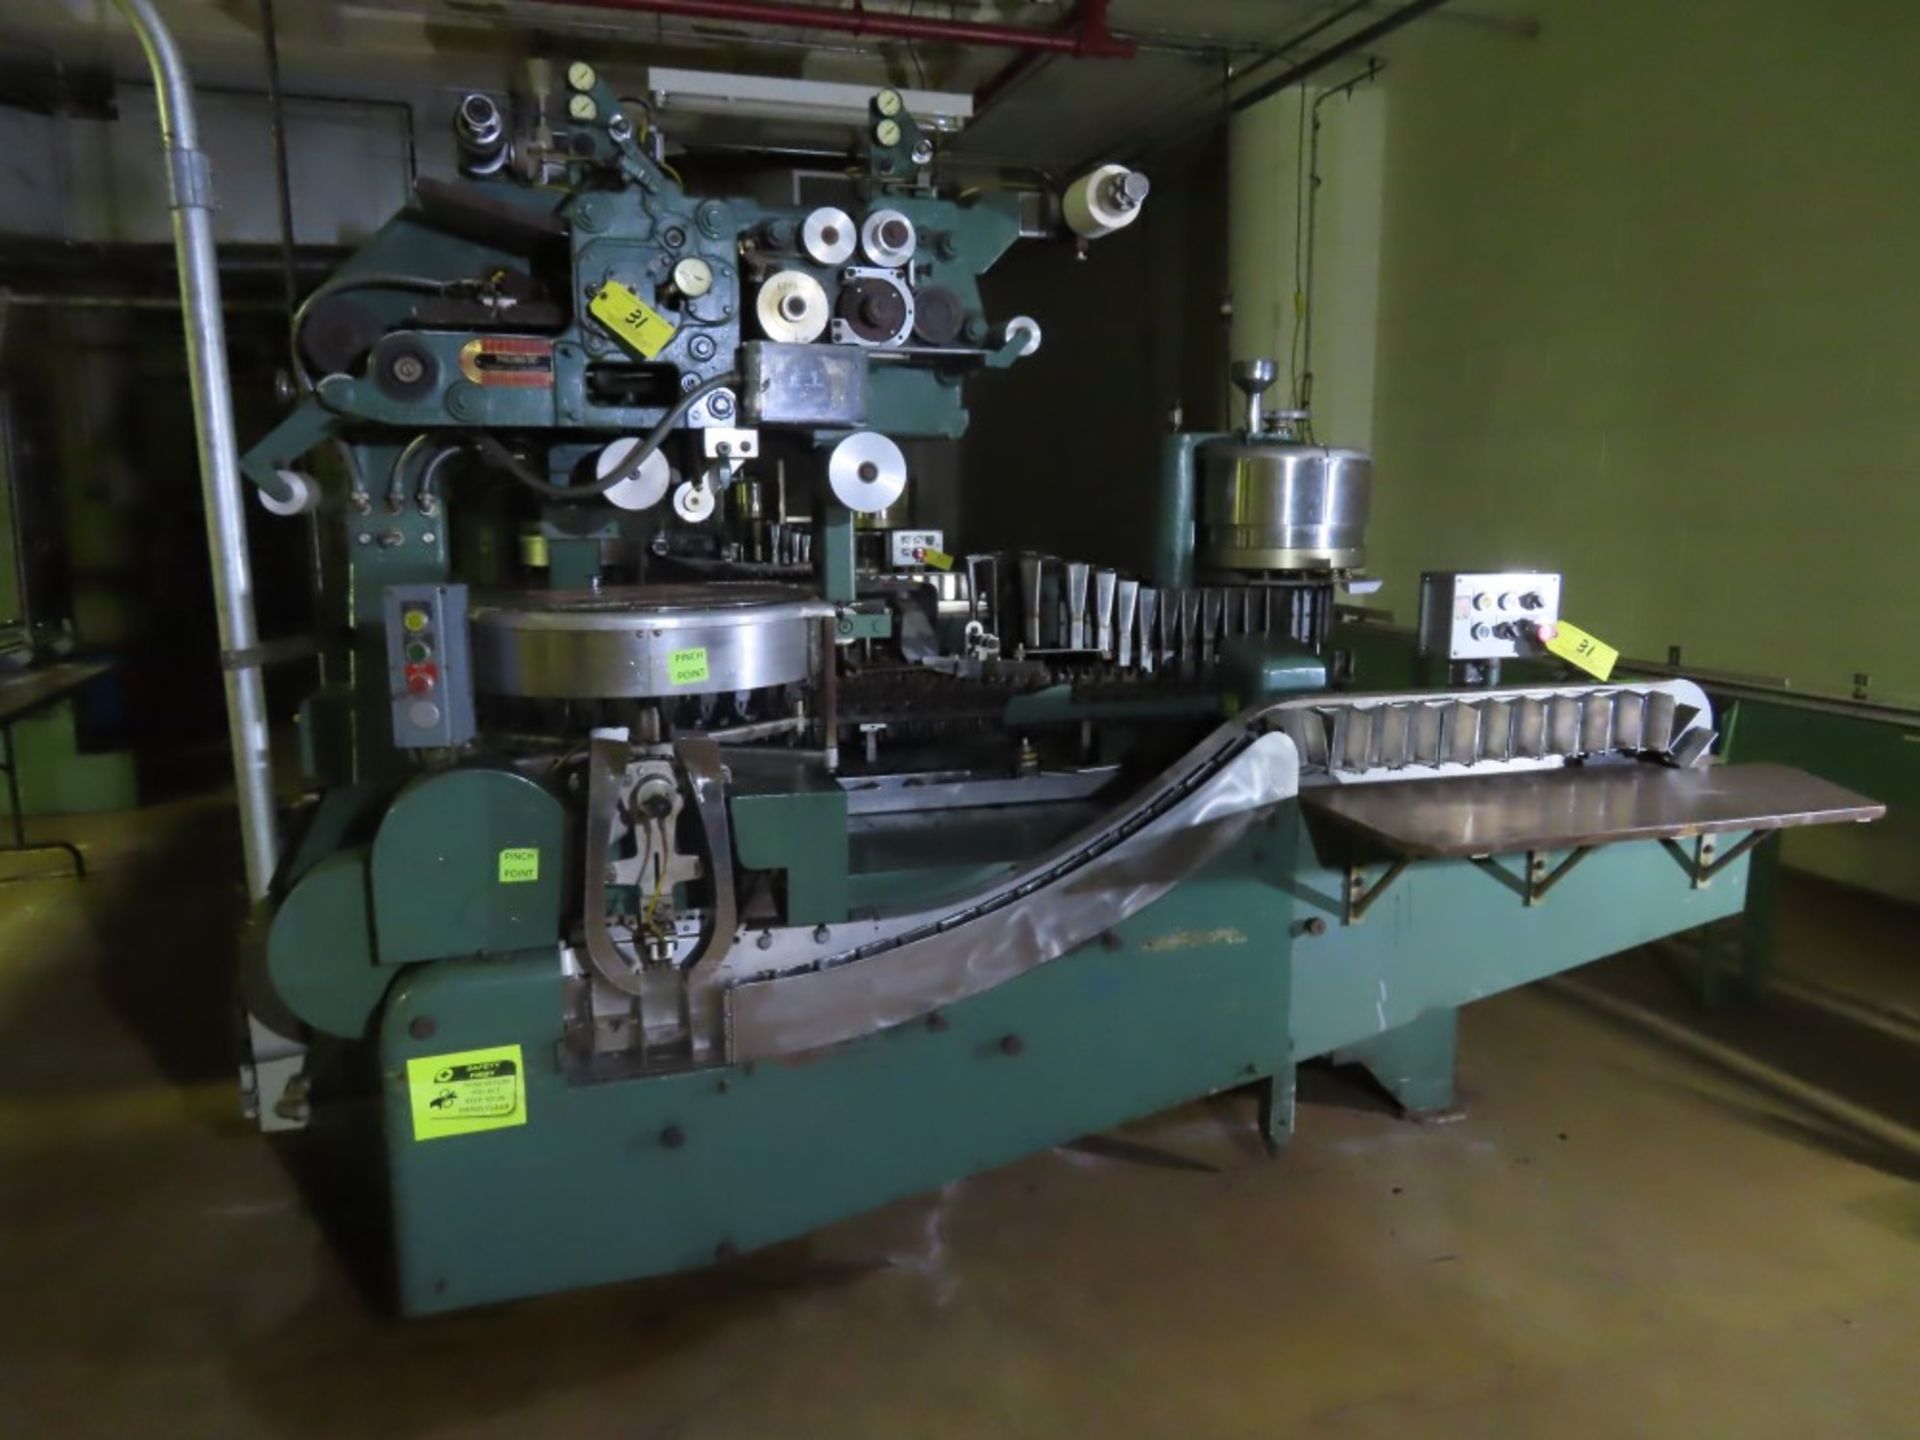 Packaging Machine Manufactured by: (SEE NOTE)